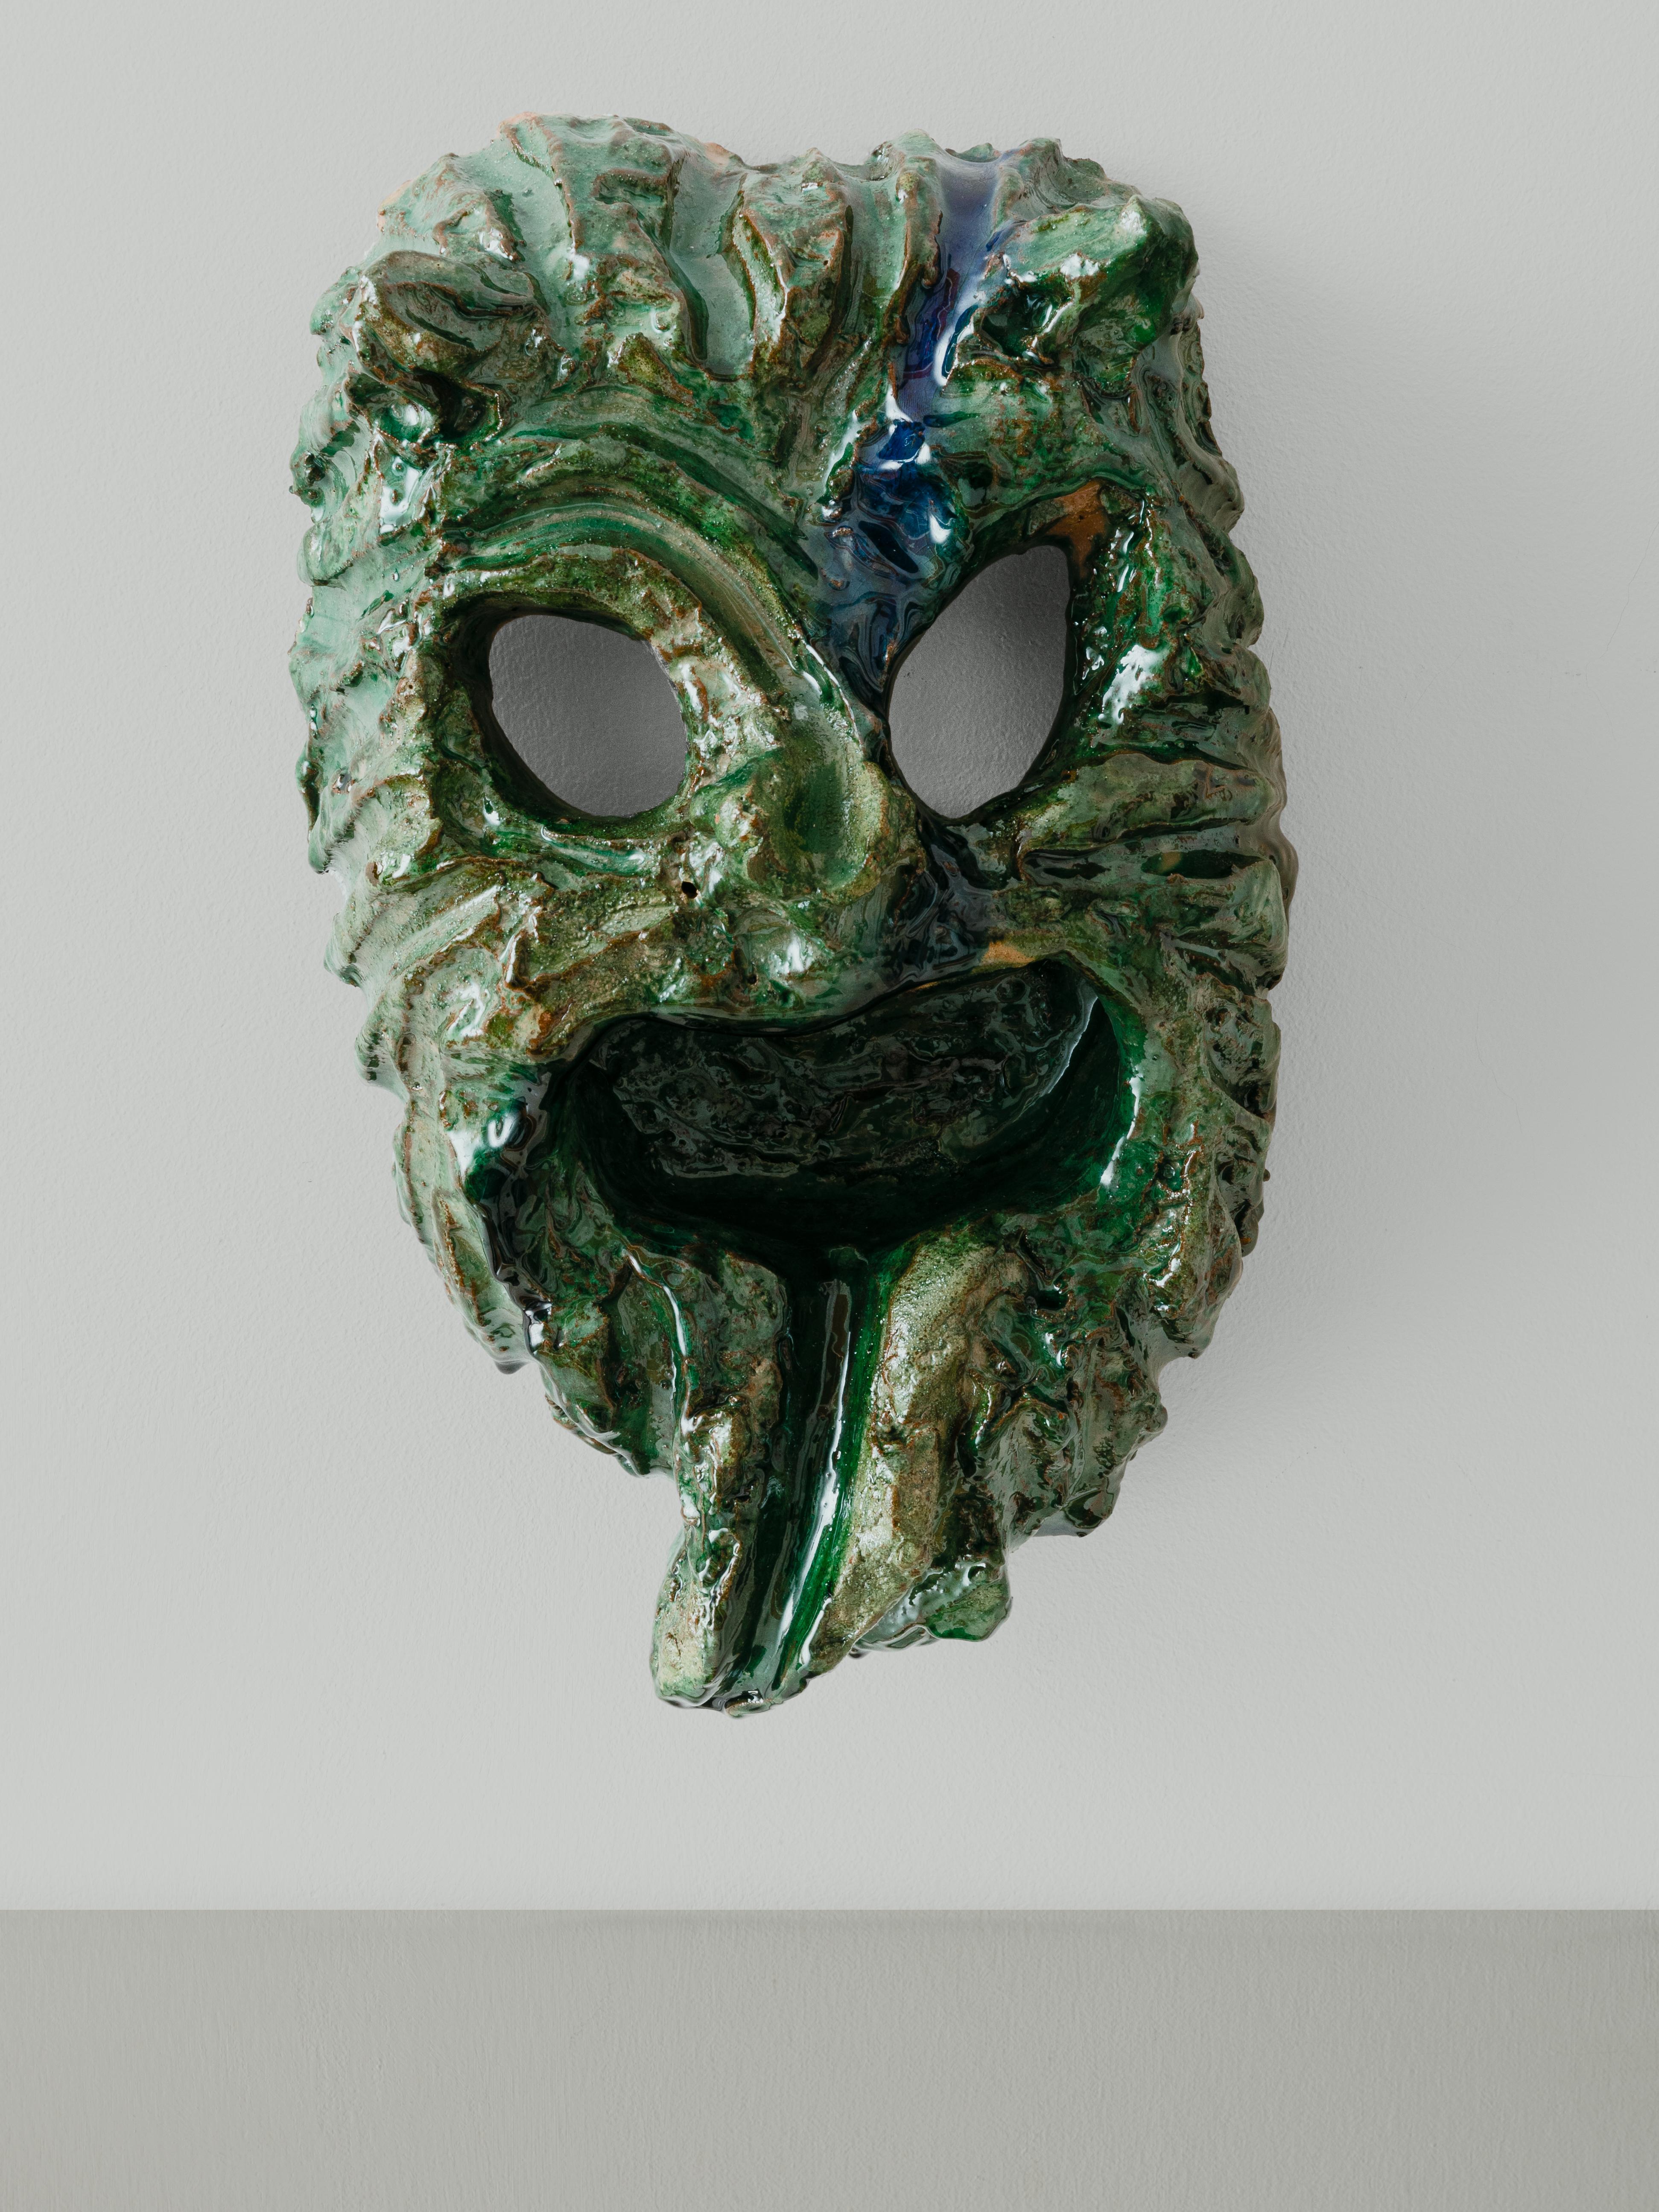 The apotropaic (warding off evil) mask from Seminara can be distinguished by its horns, wide eyes, mustache, and screaming mouth with its tongue sticking out. The masks are finished in enormous wood fired kilns, which adds an uncontrollable twist to